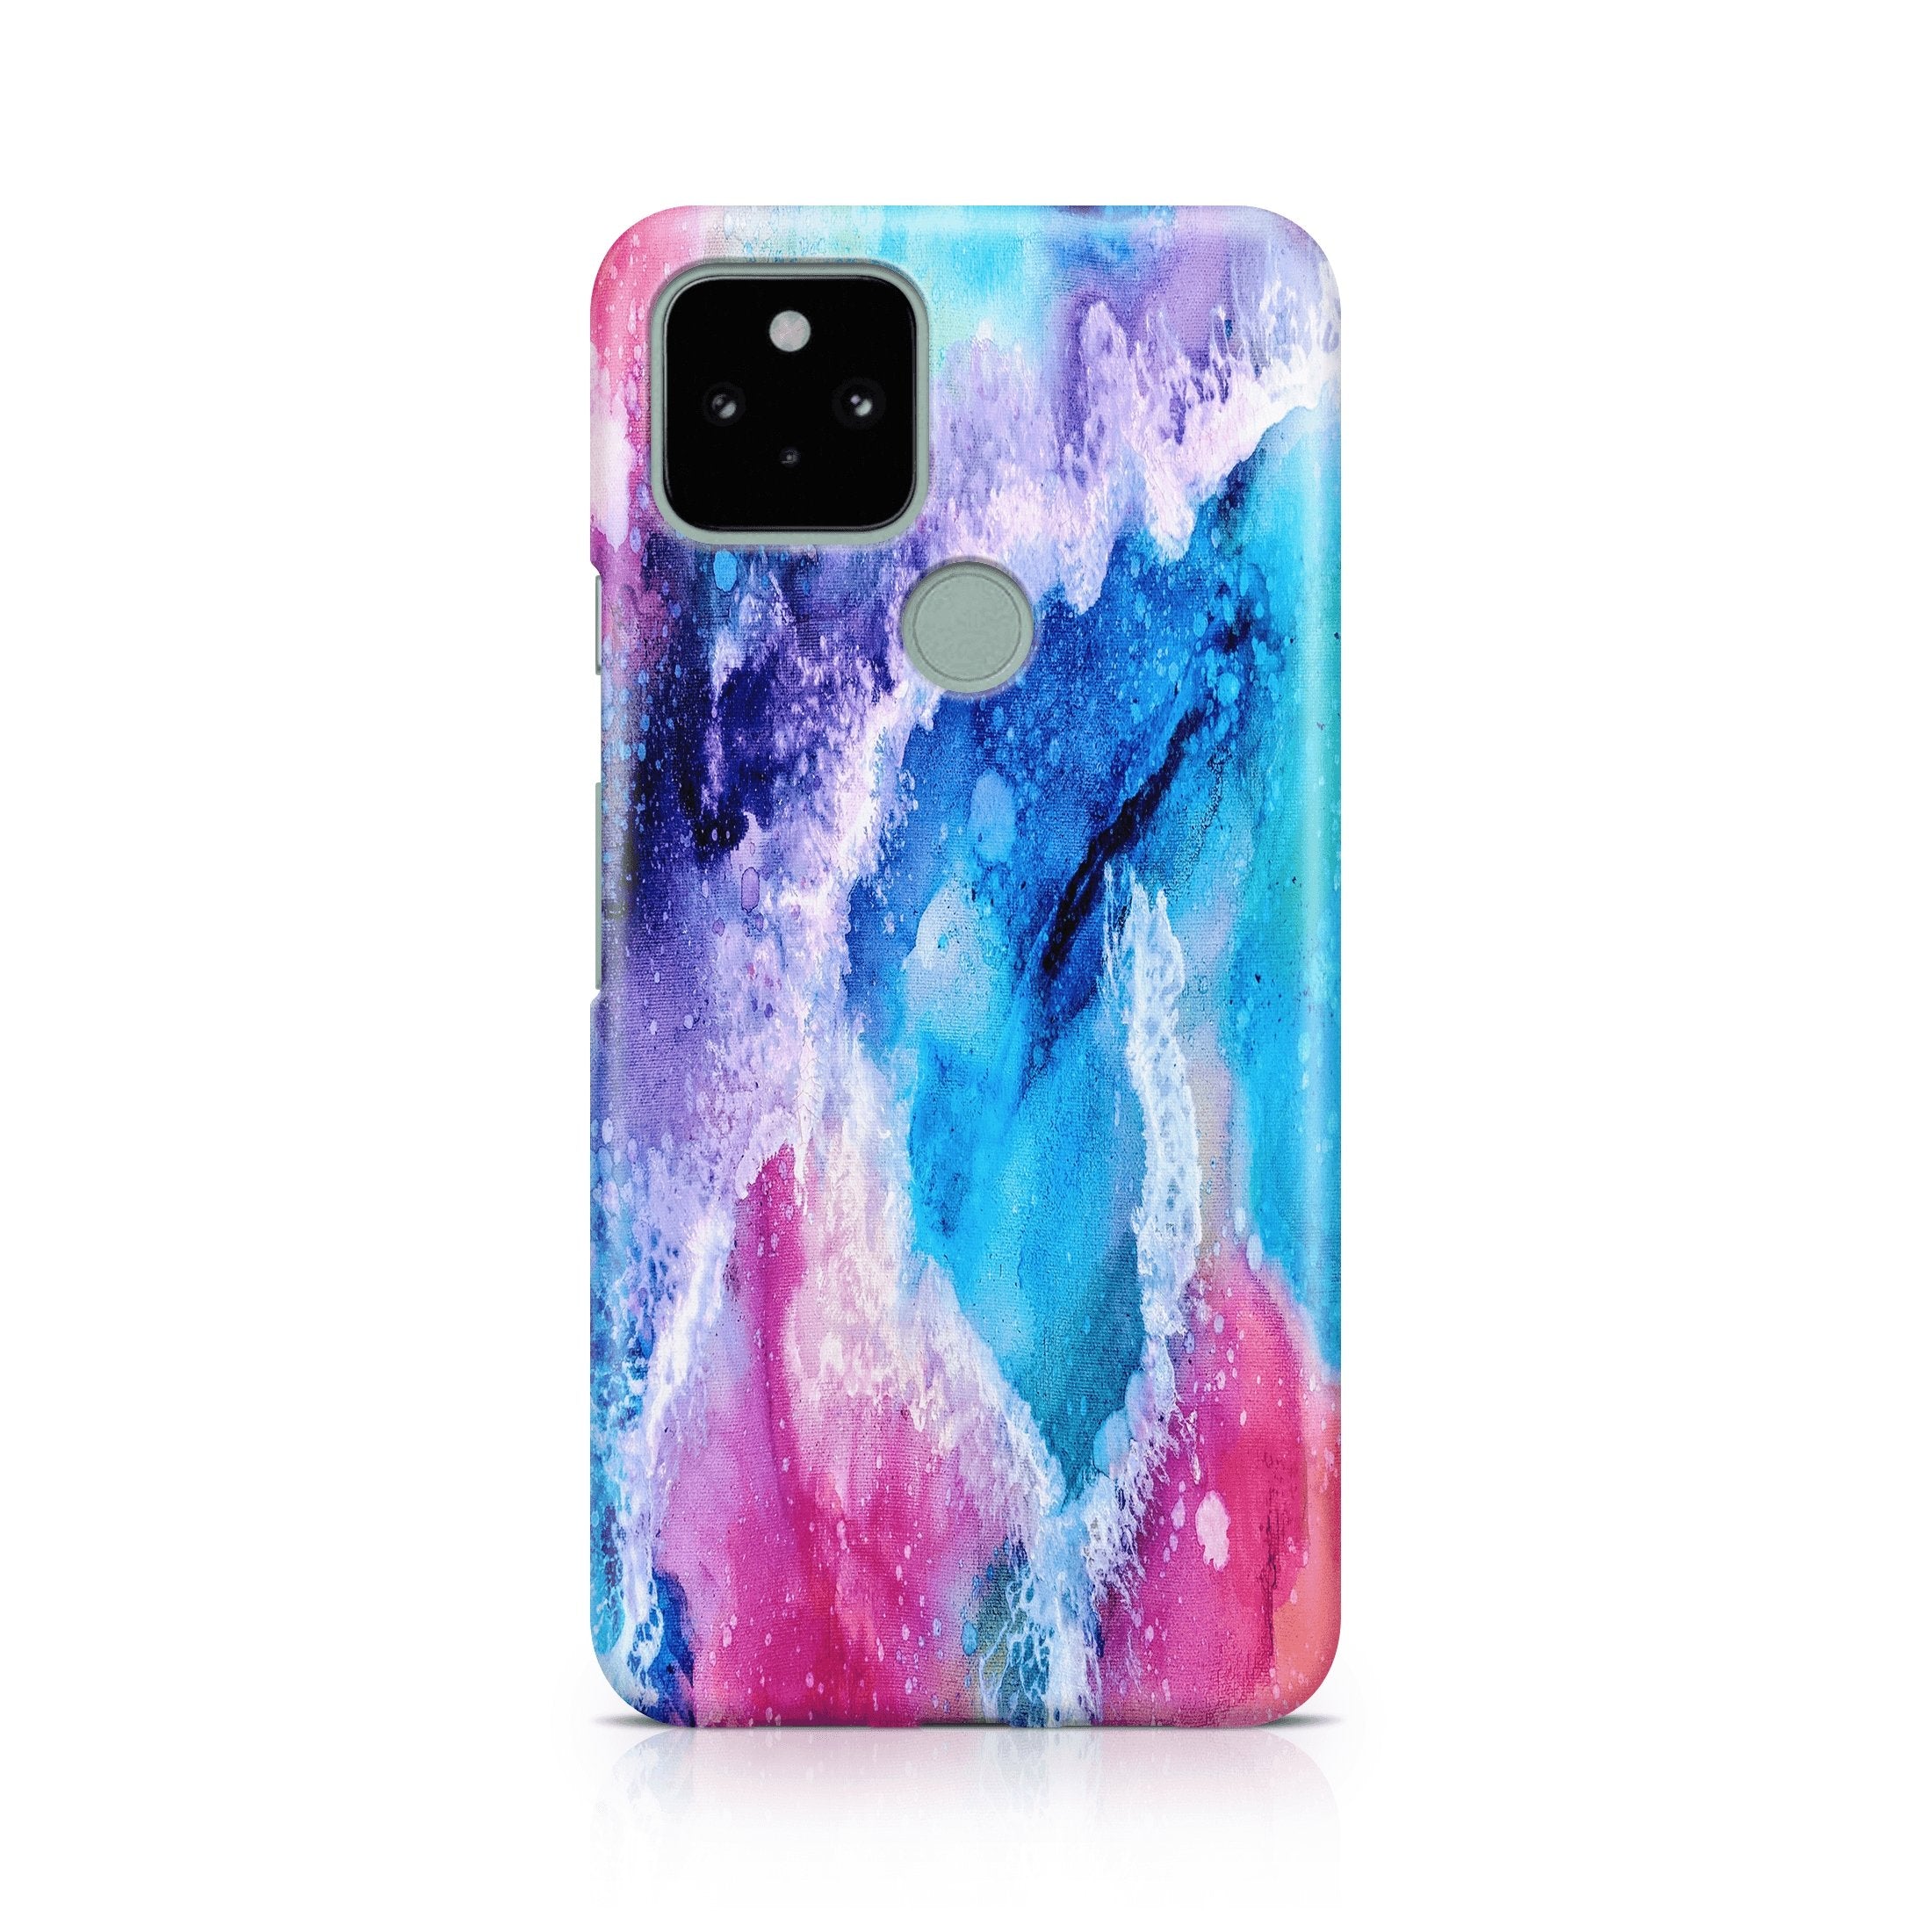 Crashing Waves - Google phone case designs by CaseSwagger